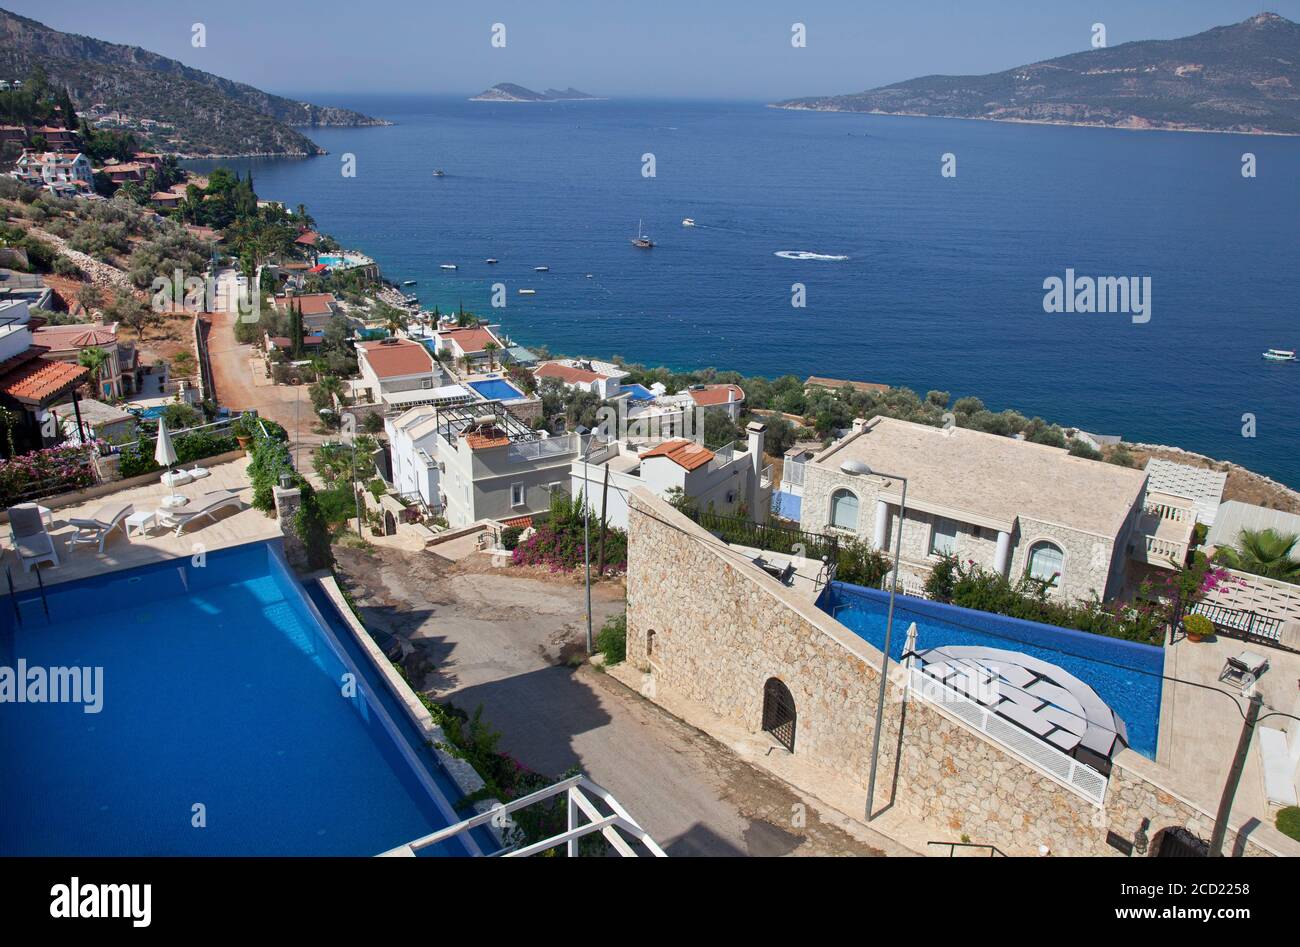 Villas in the area of Kormuluk  ( an area of Kalkan ) overlooking Kalkan bay in Turkey.  Kalkan is a popular holiday destination and is located on the Stock Photo